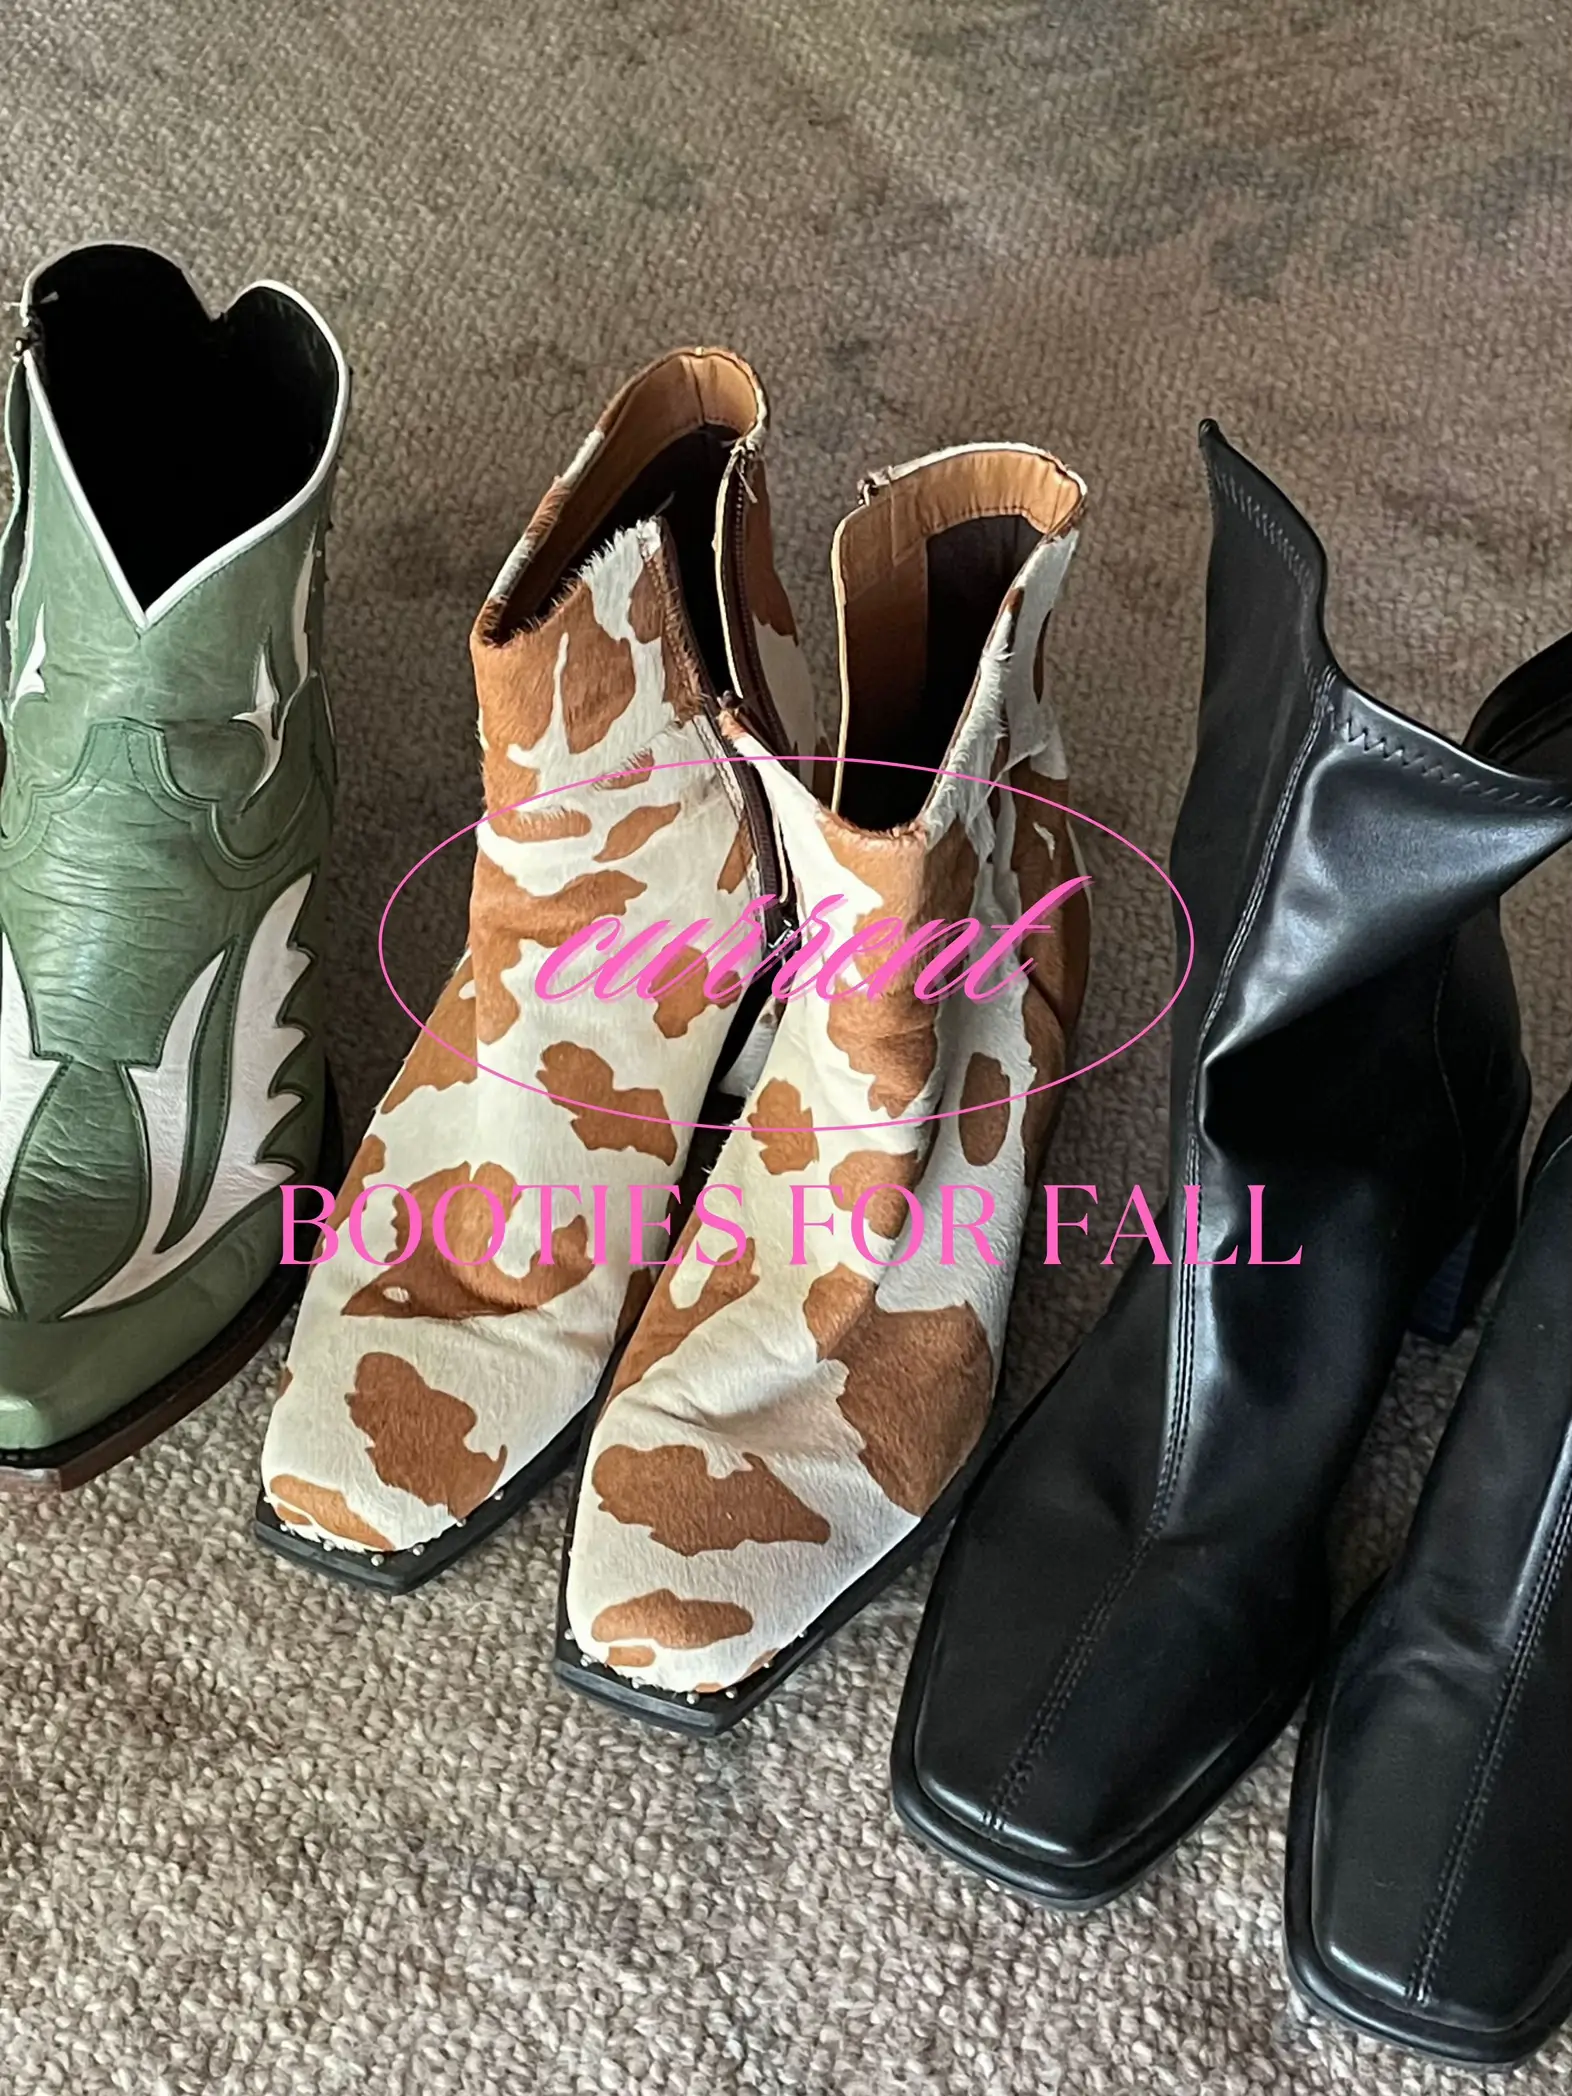 Louis Vuitton Womens Ankle & Booties Boots